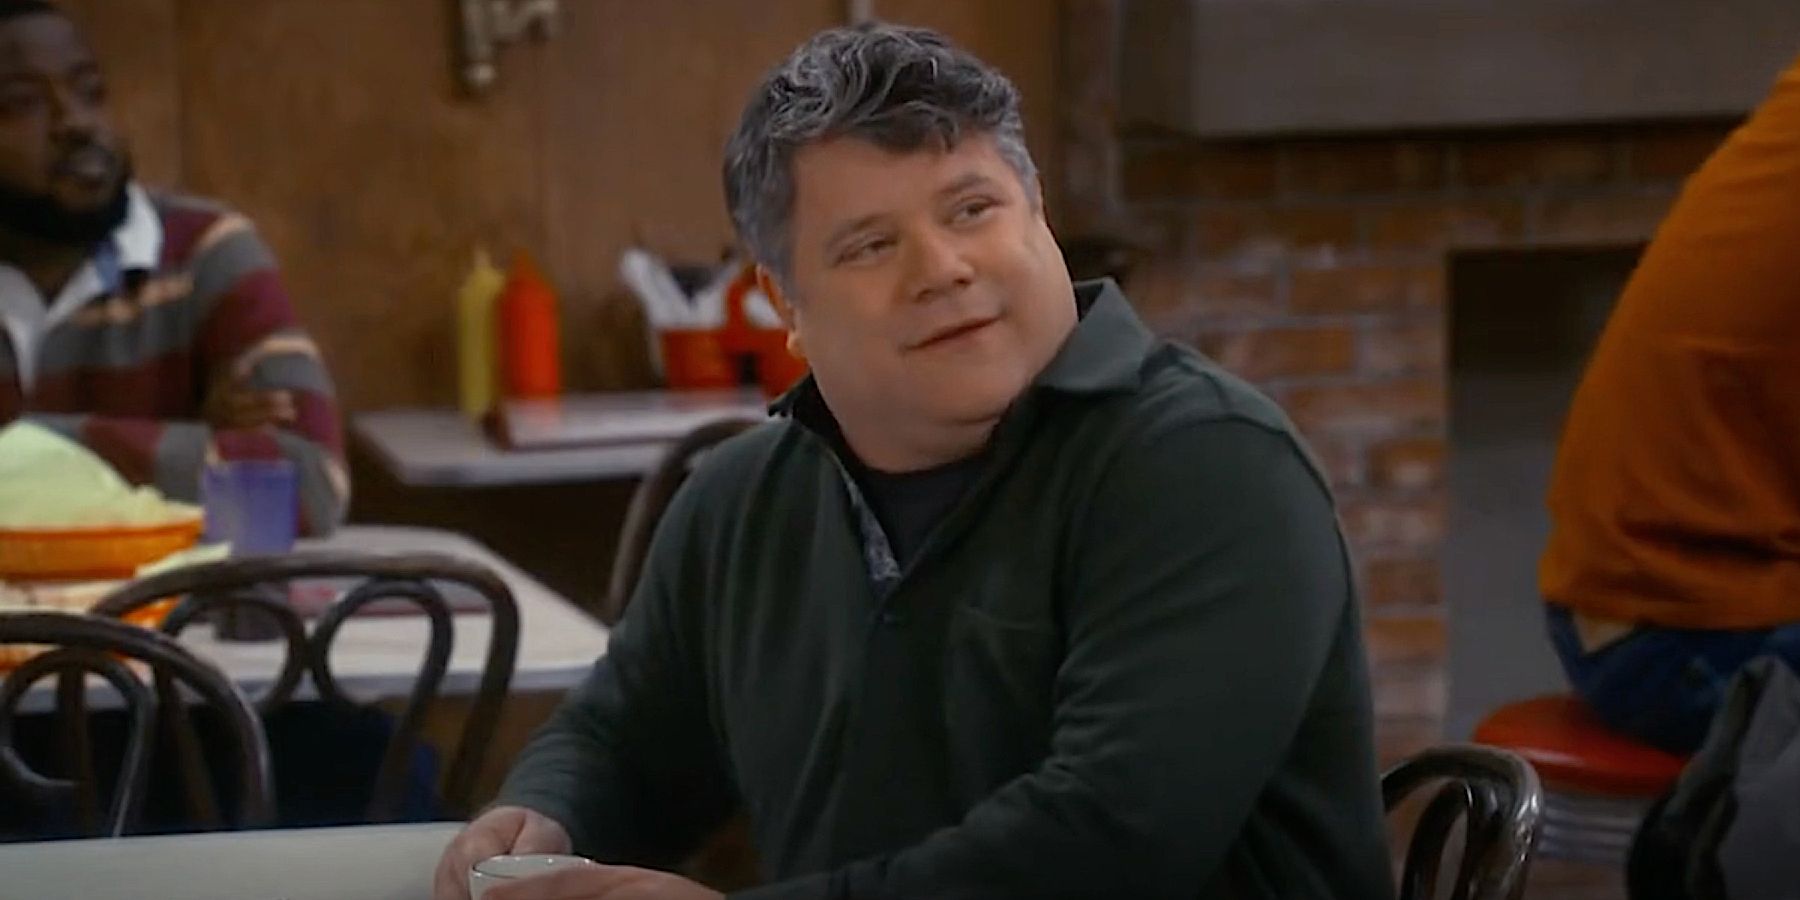 Sean Astin sitting down in The Conners season 5 episode 20